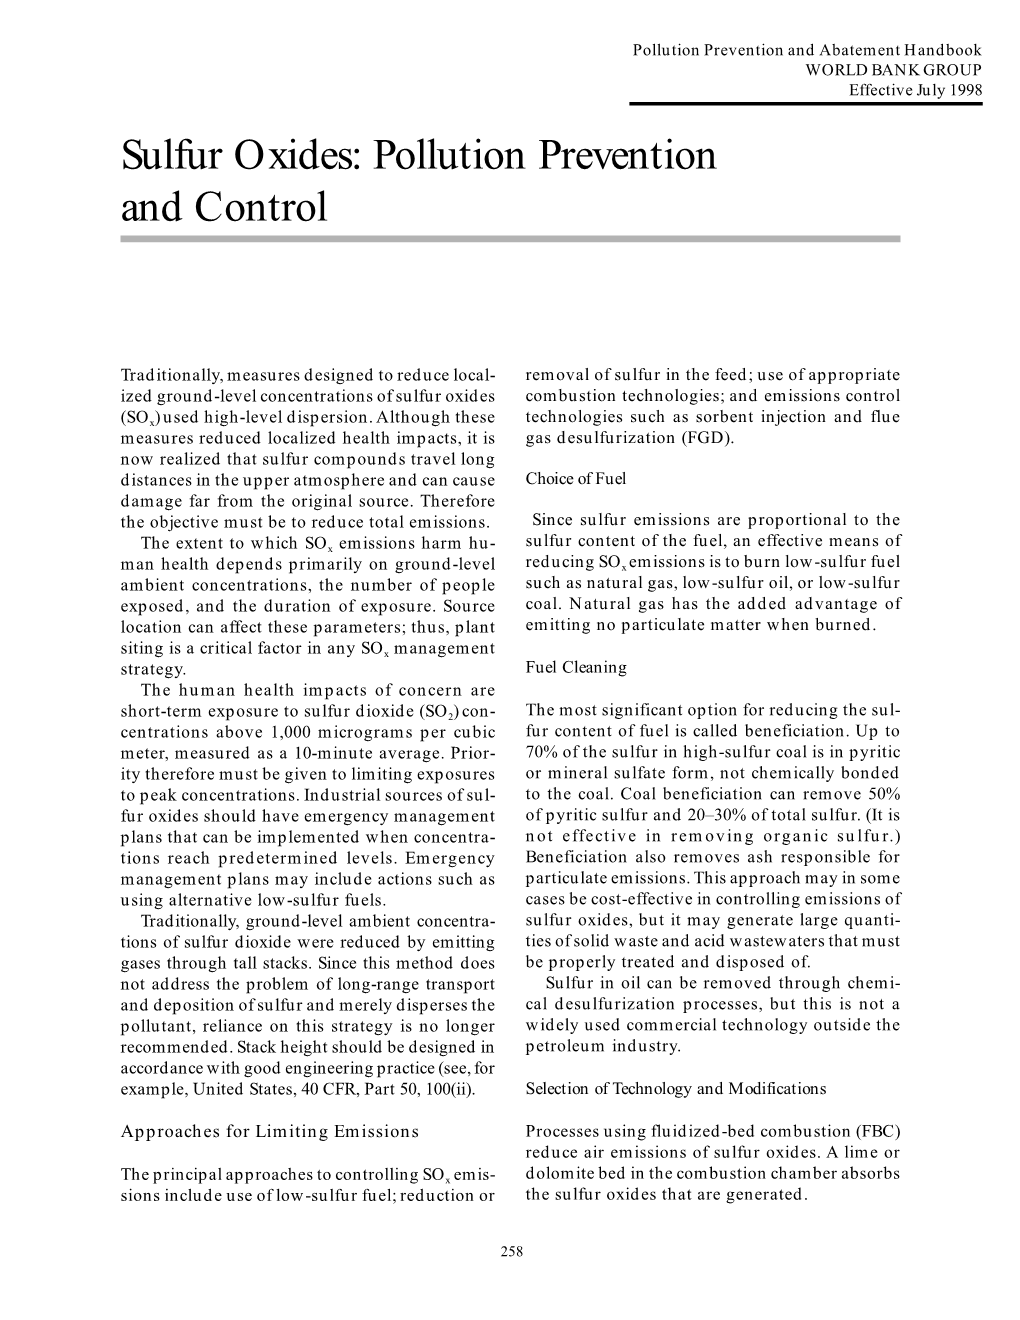 Sulfur Oxides: Pollution Prevention and Control